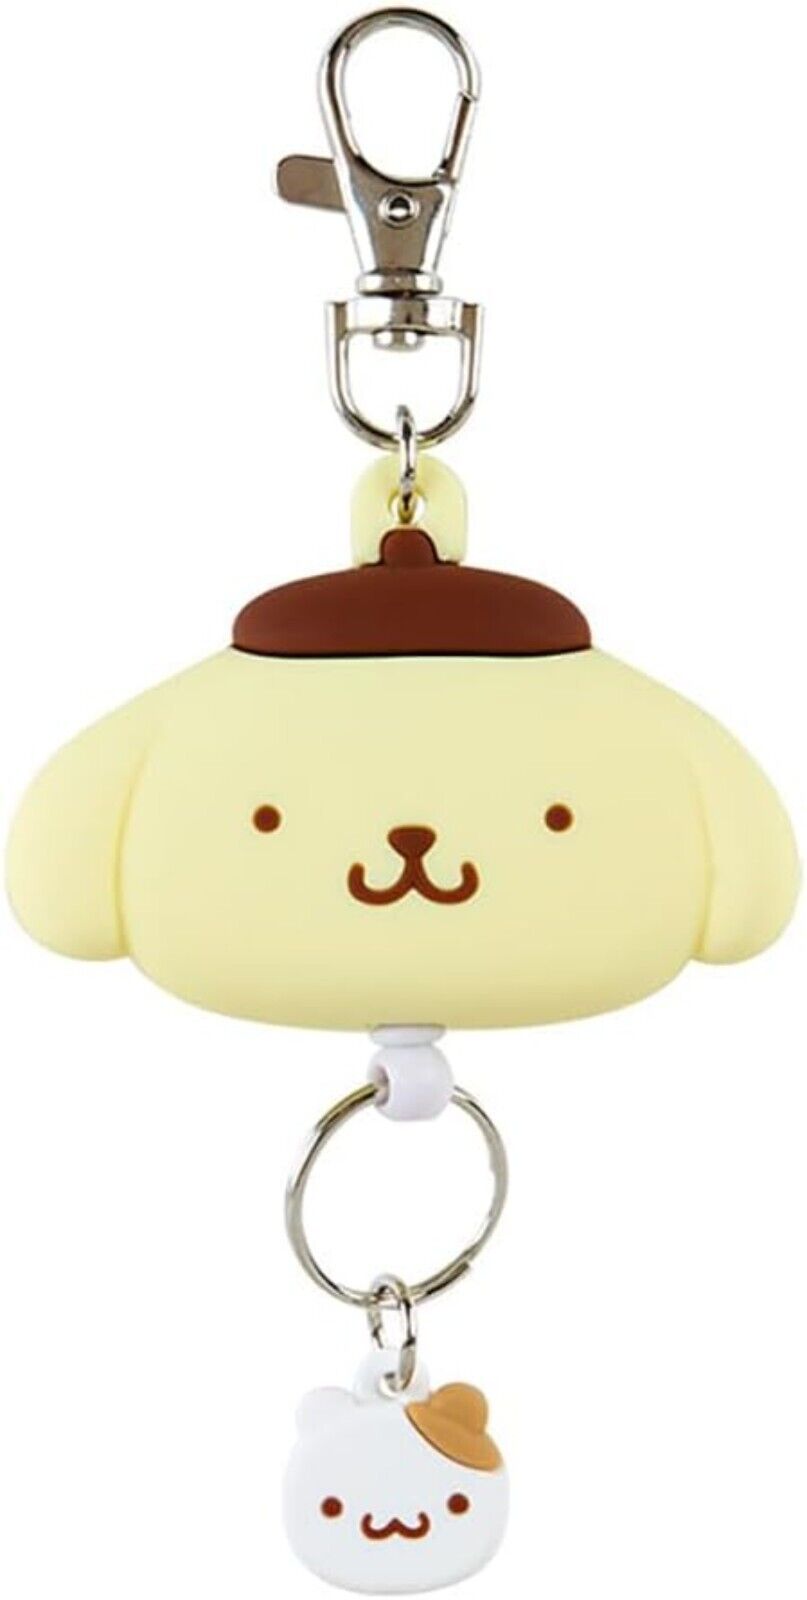 Sanrio Character Pompompurin Face Type Reel Keychain Mascot Bag Charm New Japan